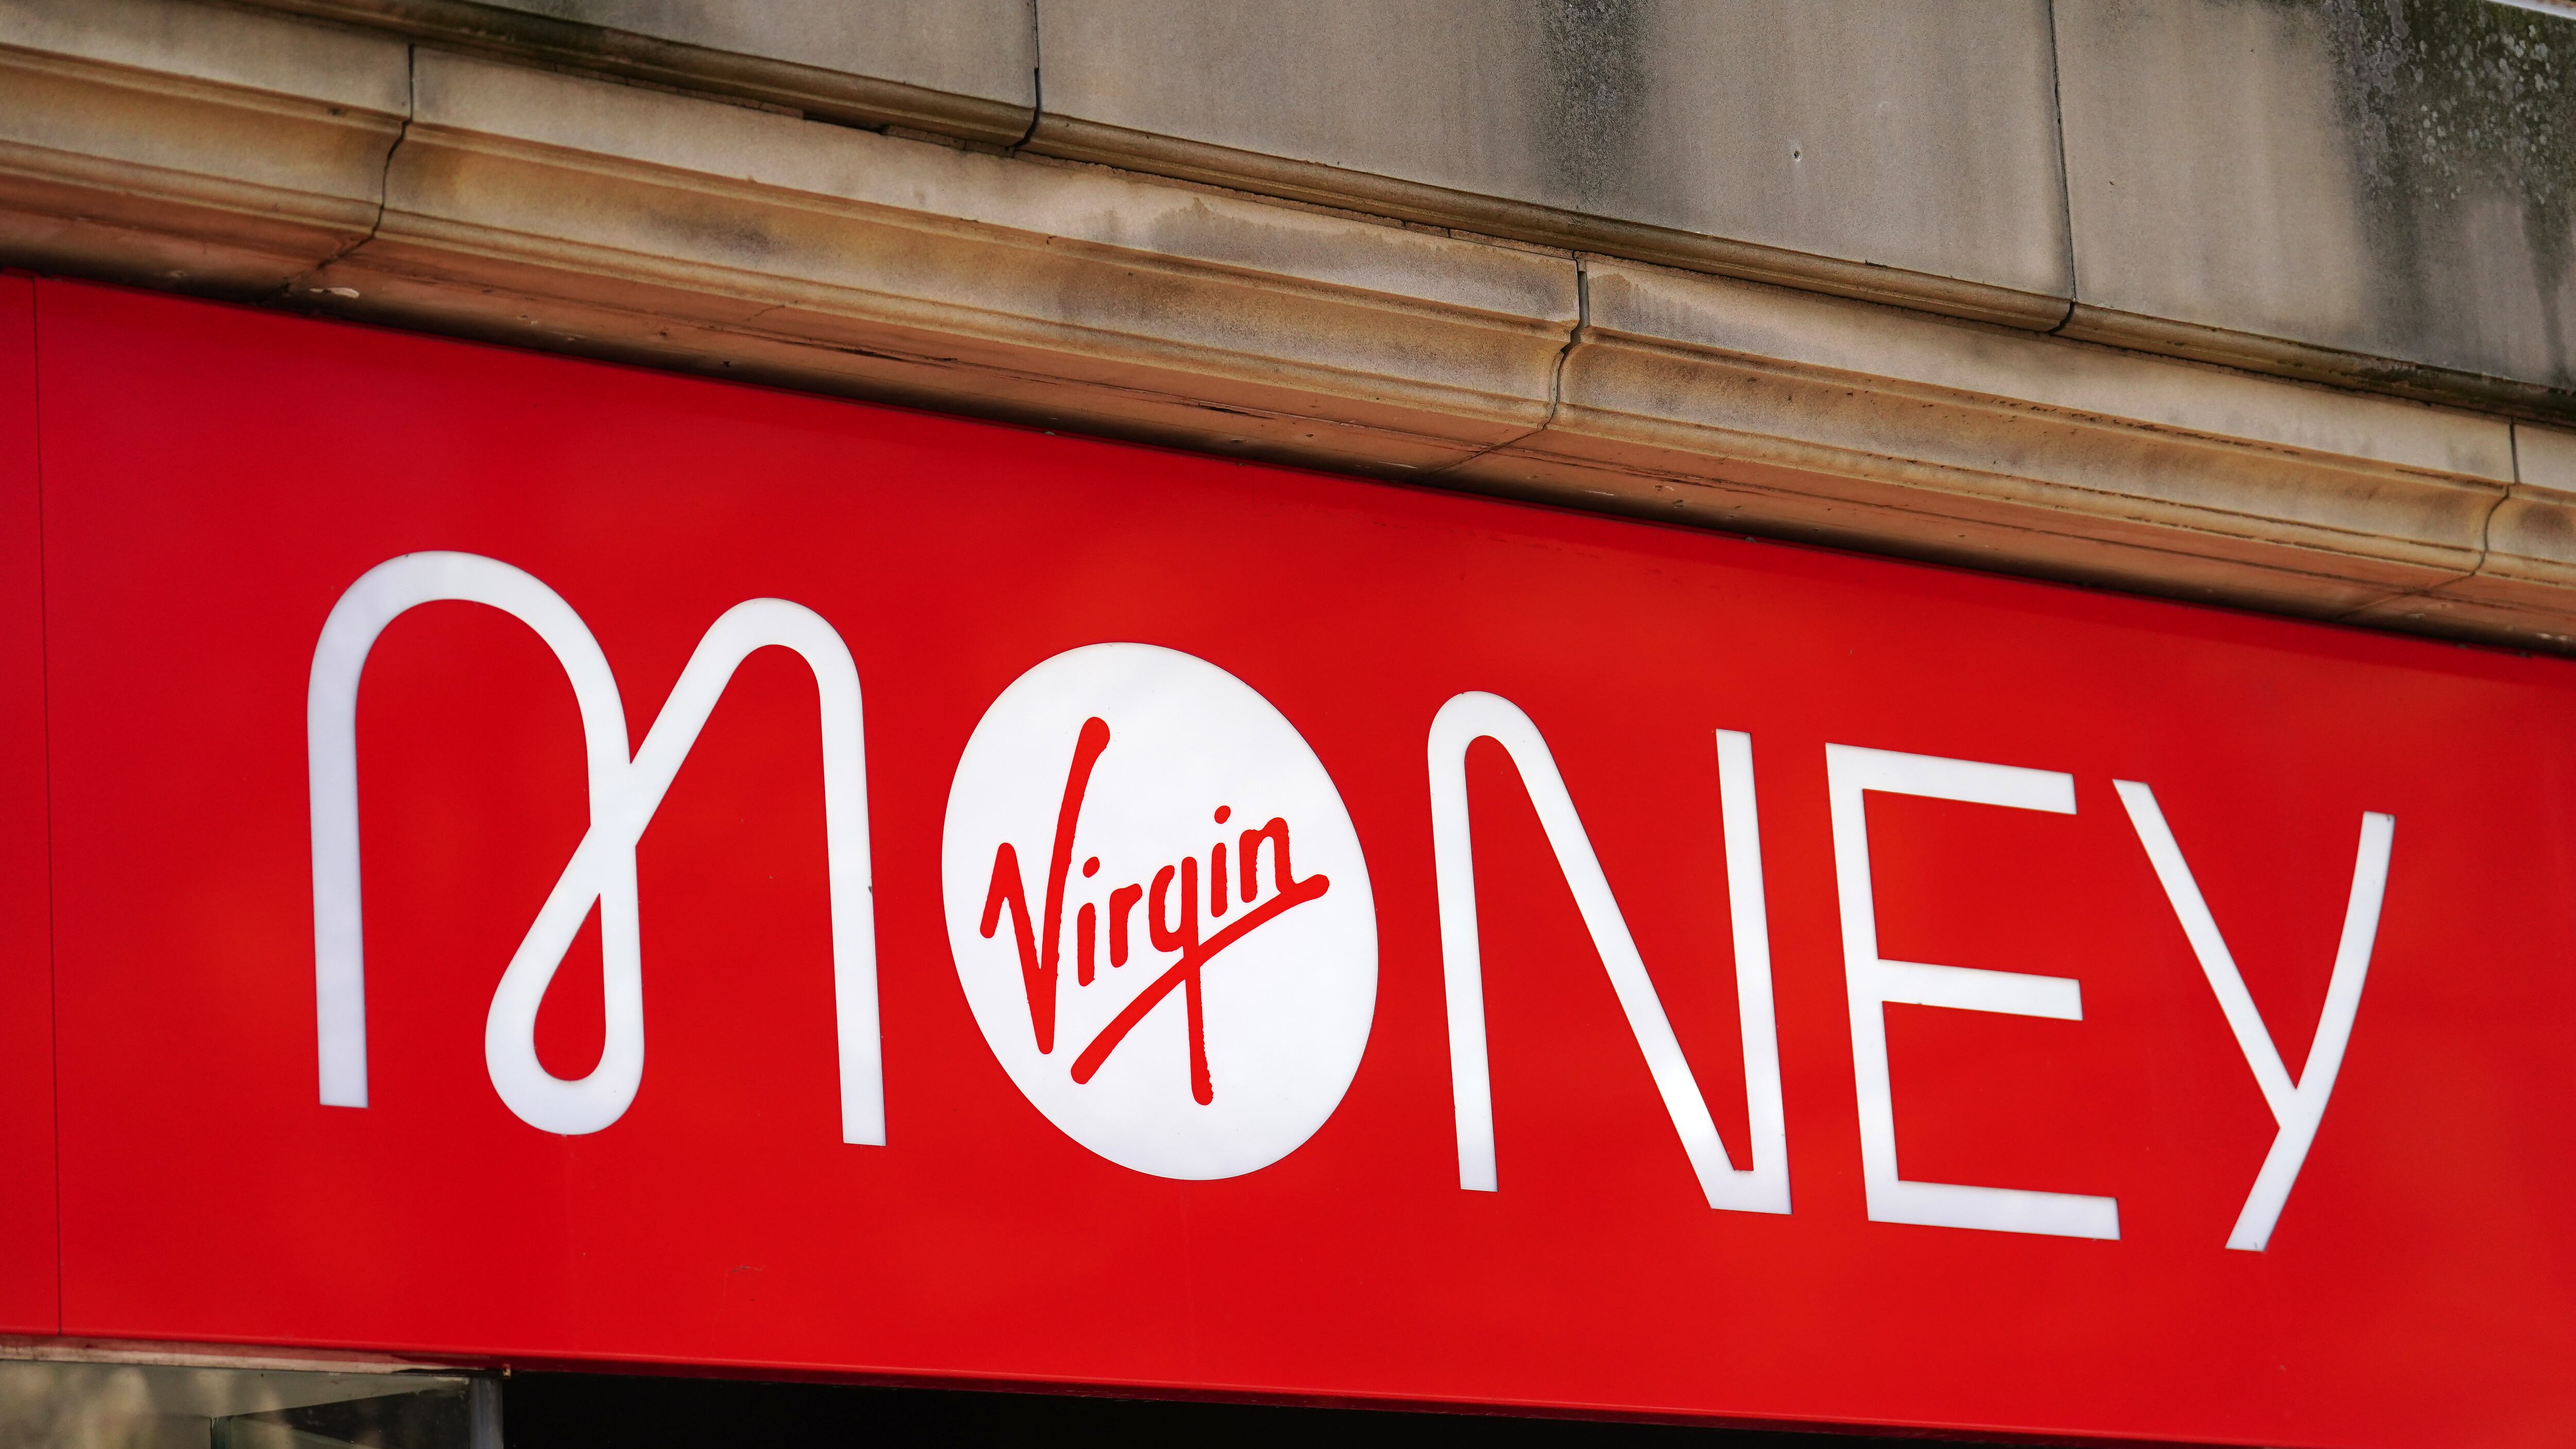 Nationwide Building Society is planning to take over smaller rival Virgin Money